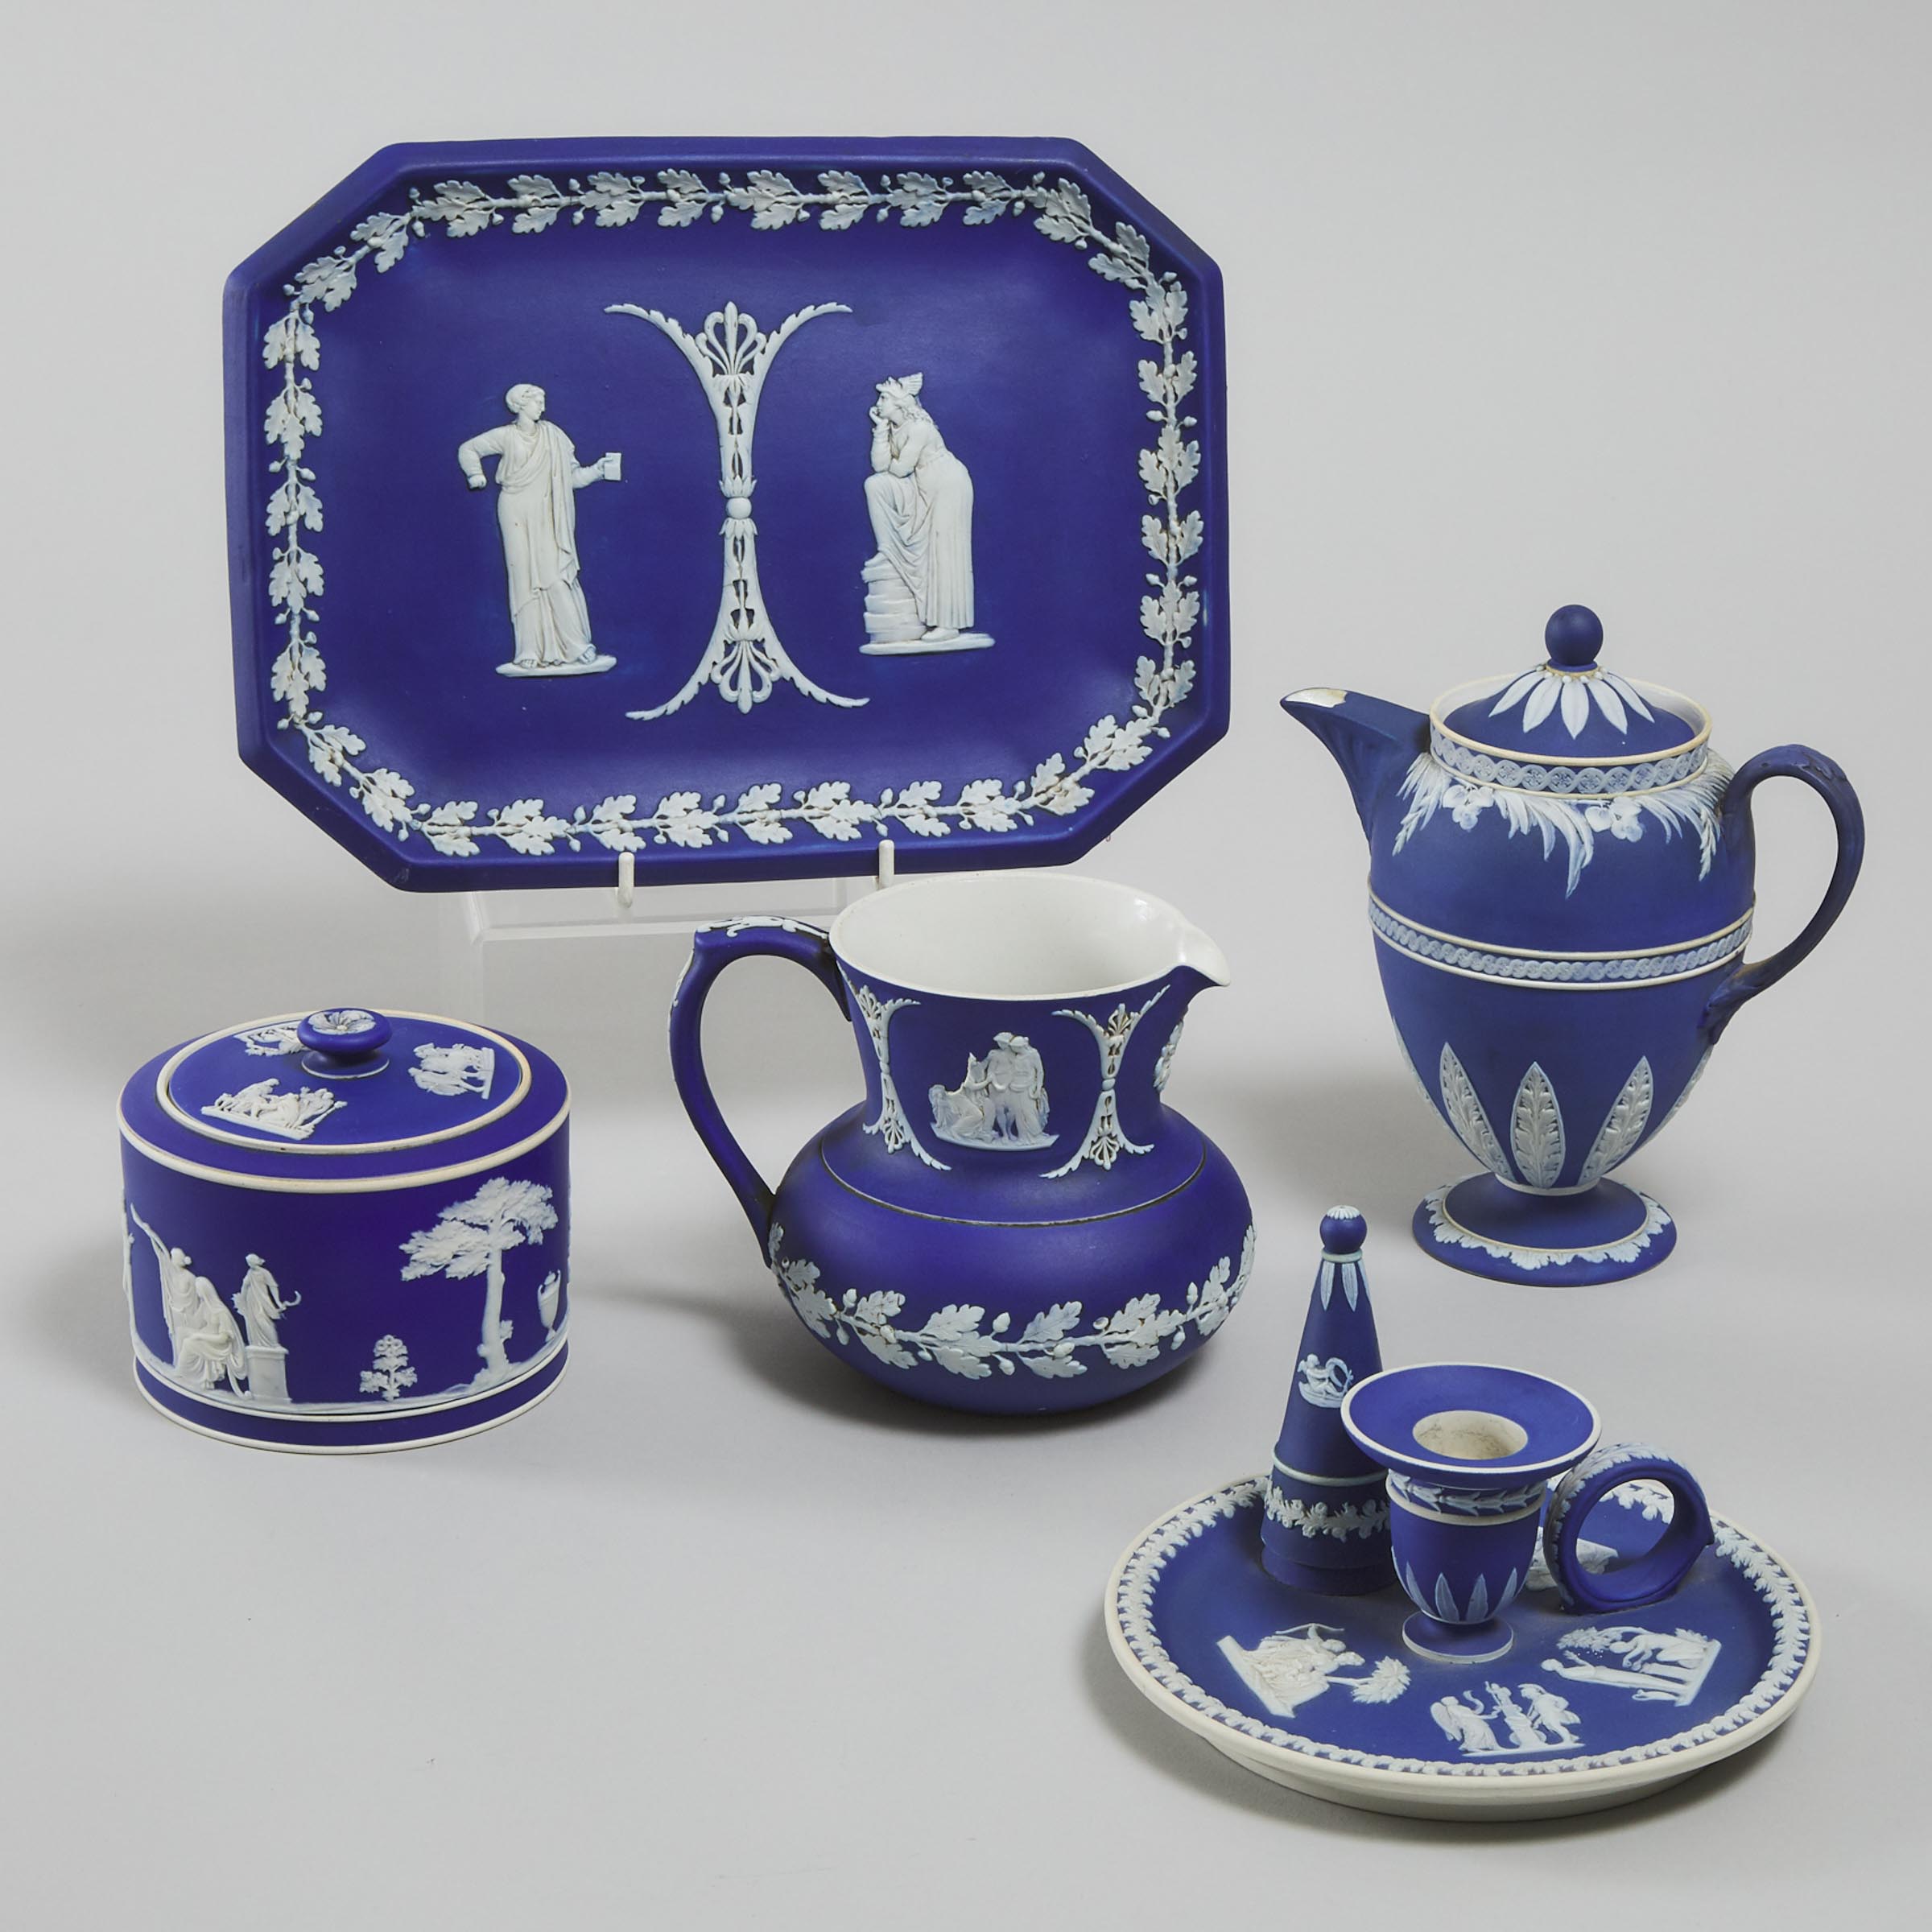 Group of Wedgwood Blue Jasper-Dip Pottery, late 19th century